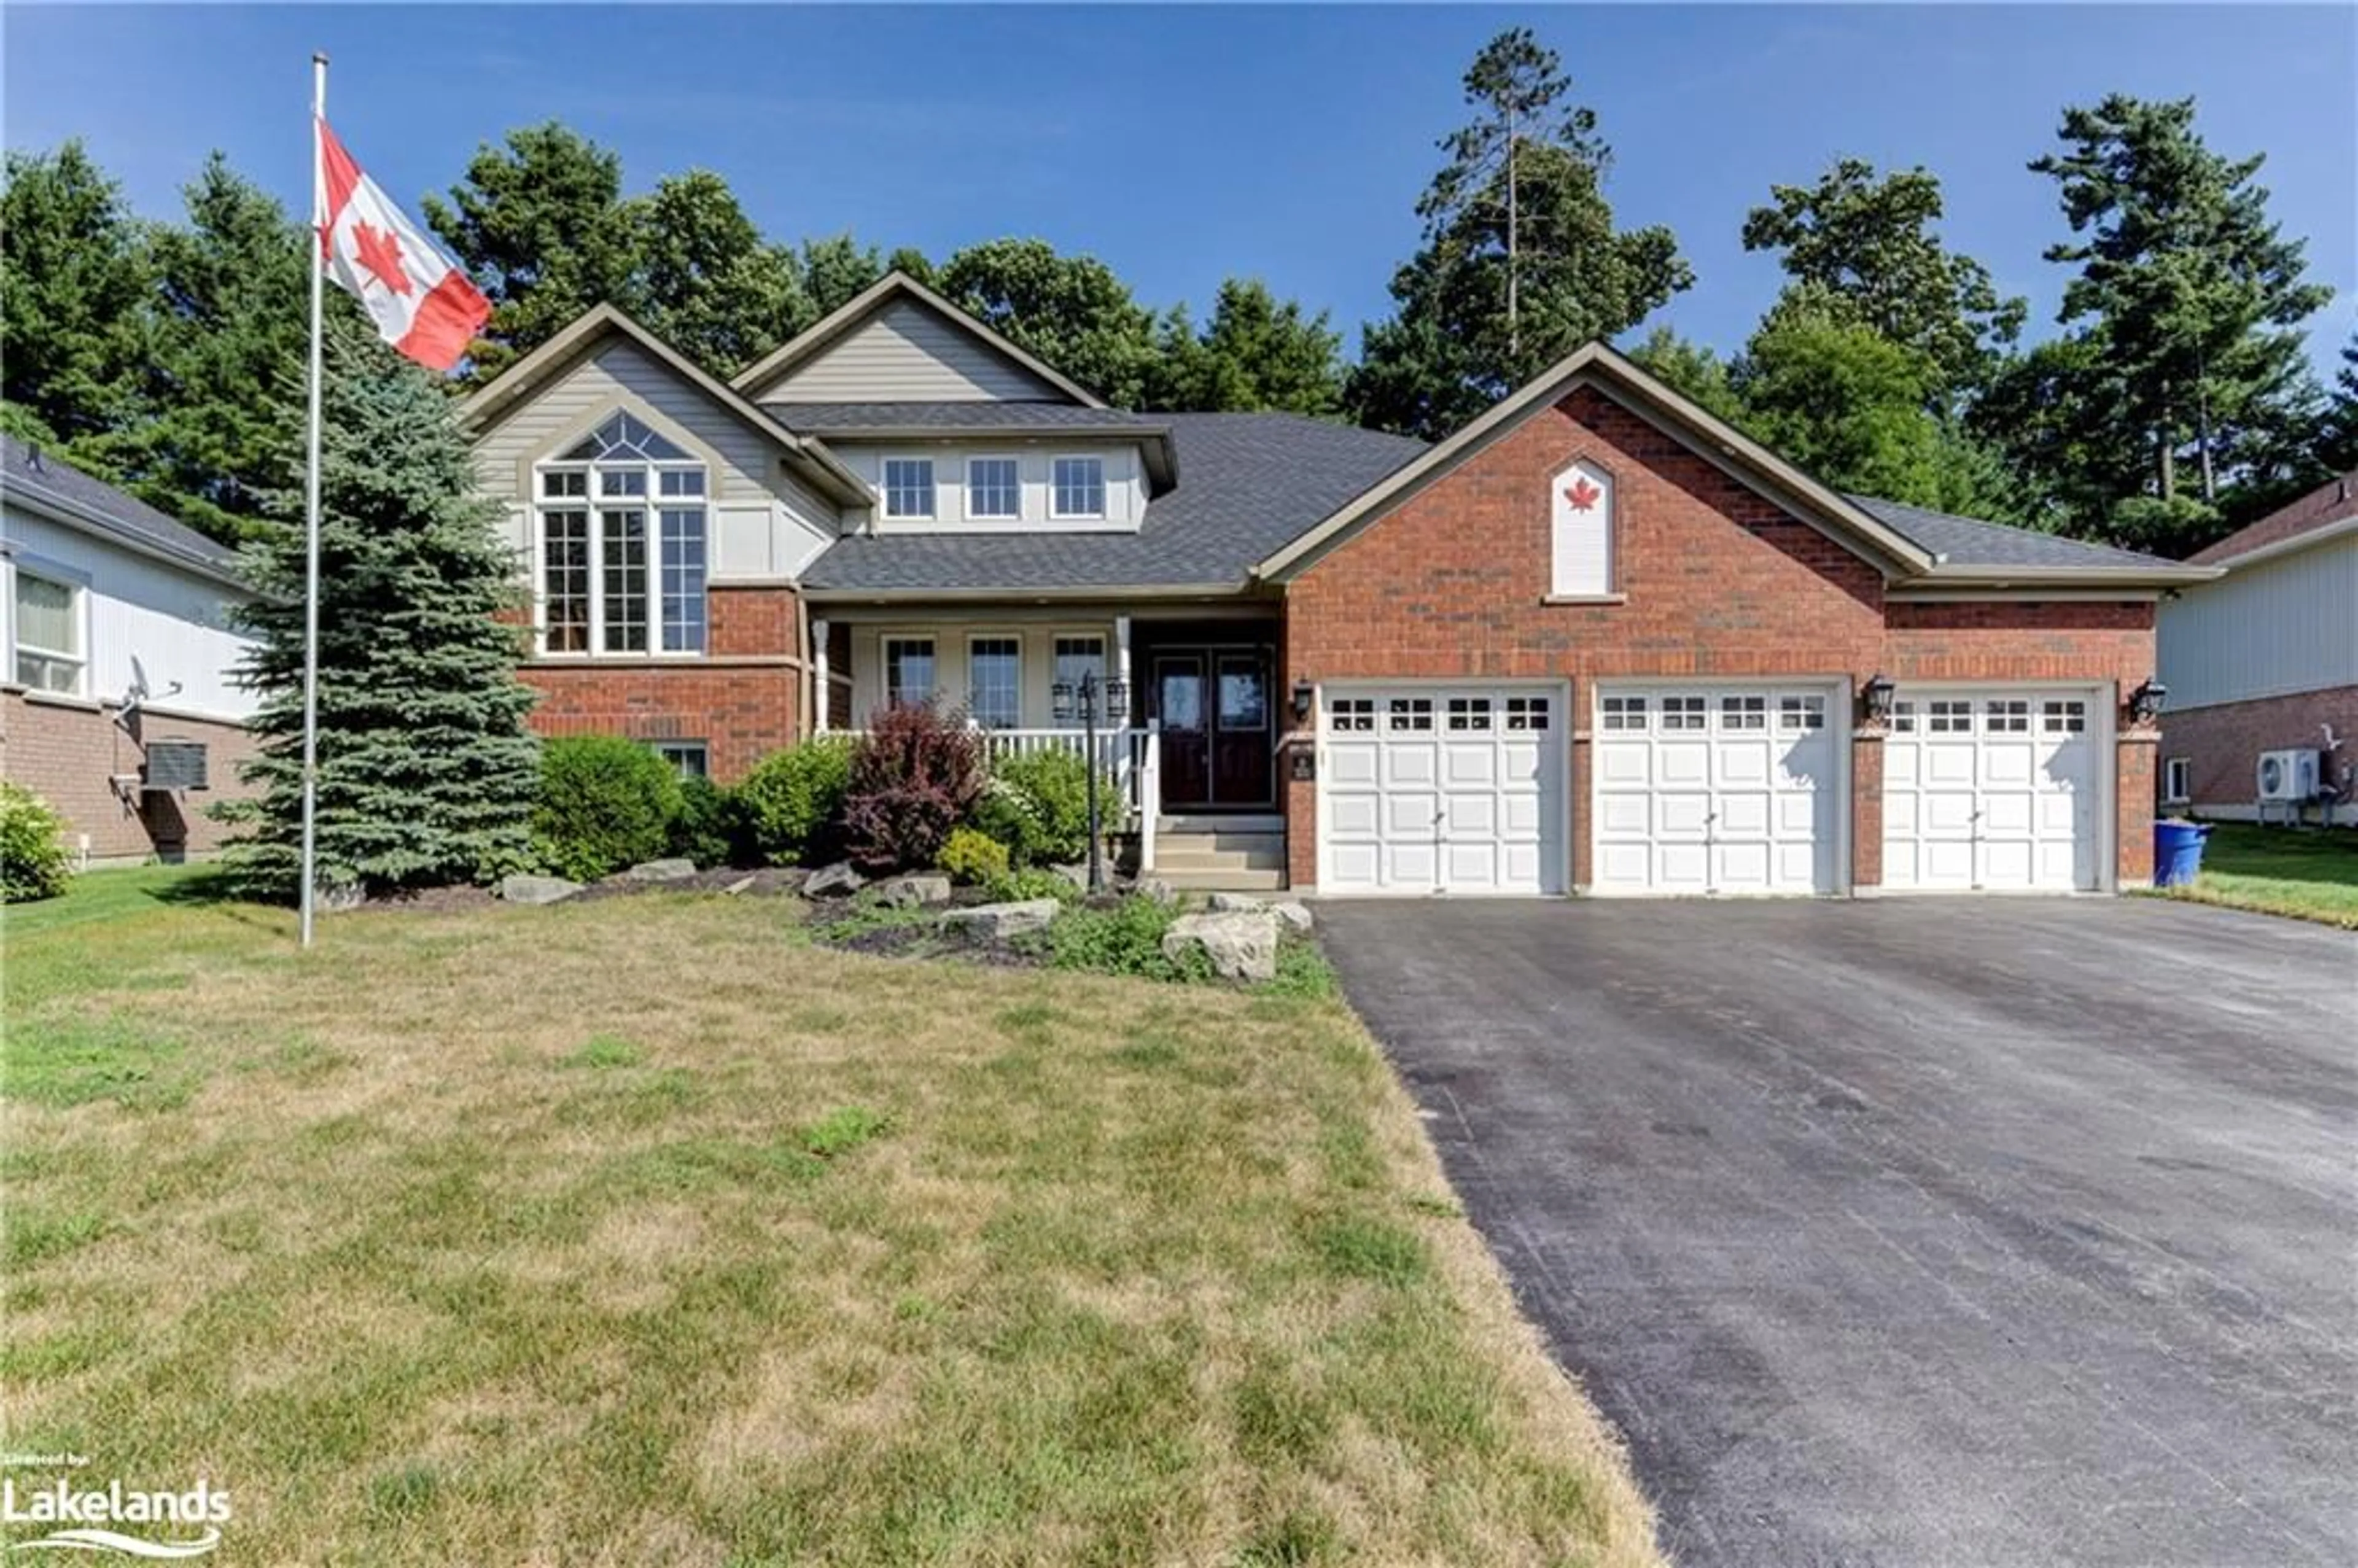 Home with brick exterior material for 31 Fawndale Cres, Wasaga Beach Ontario L9Z 2B3